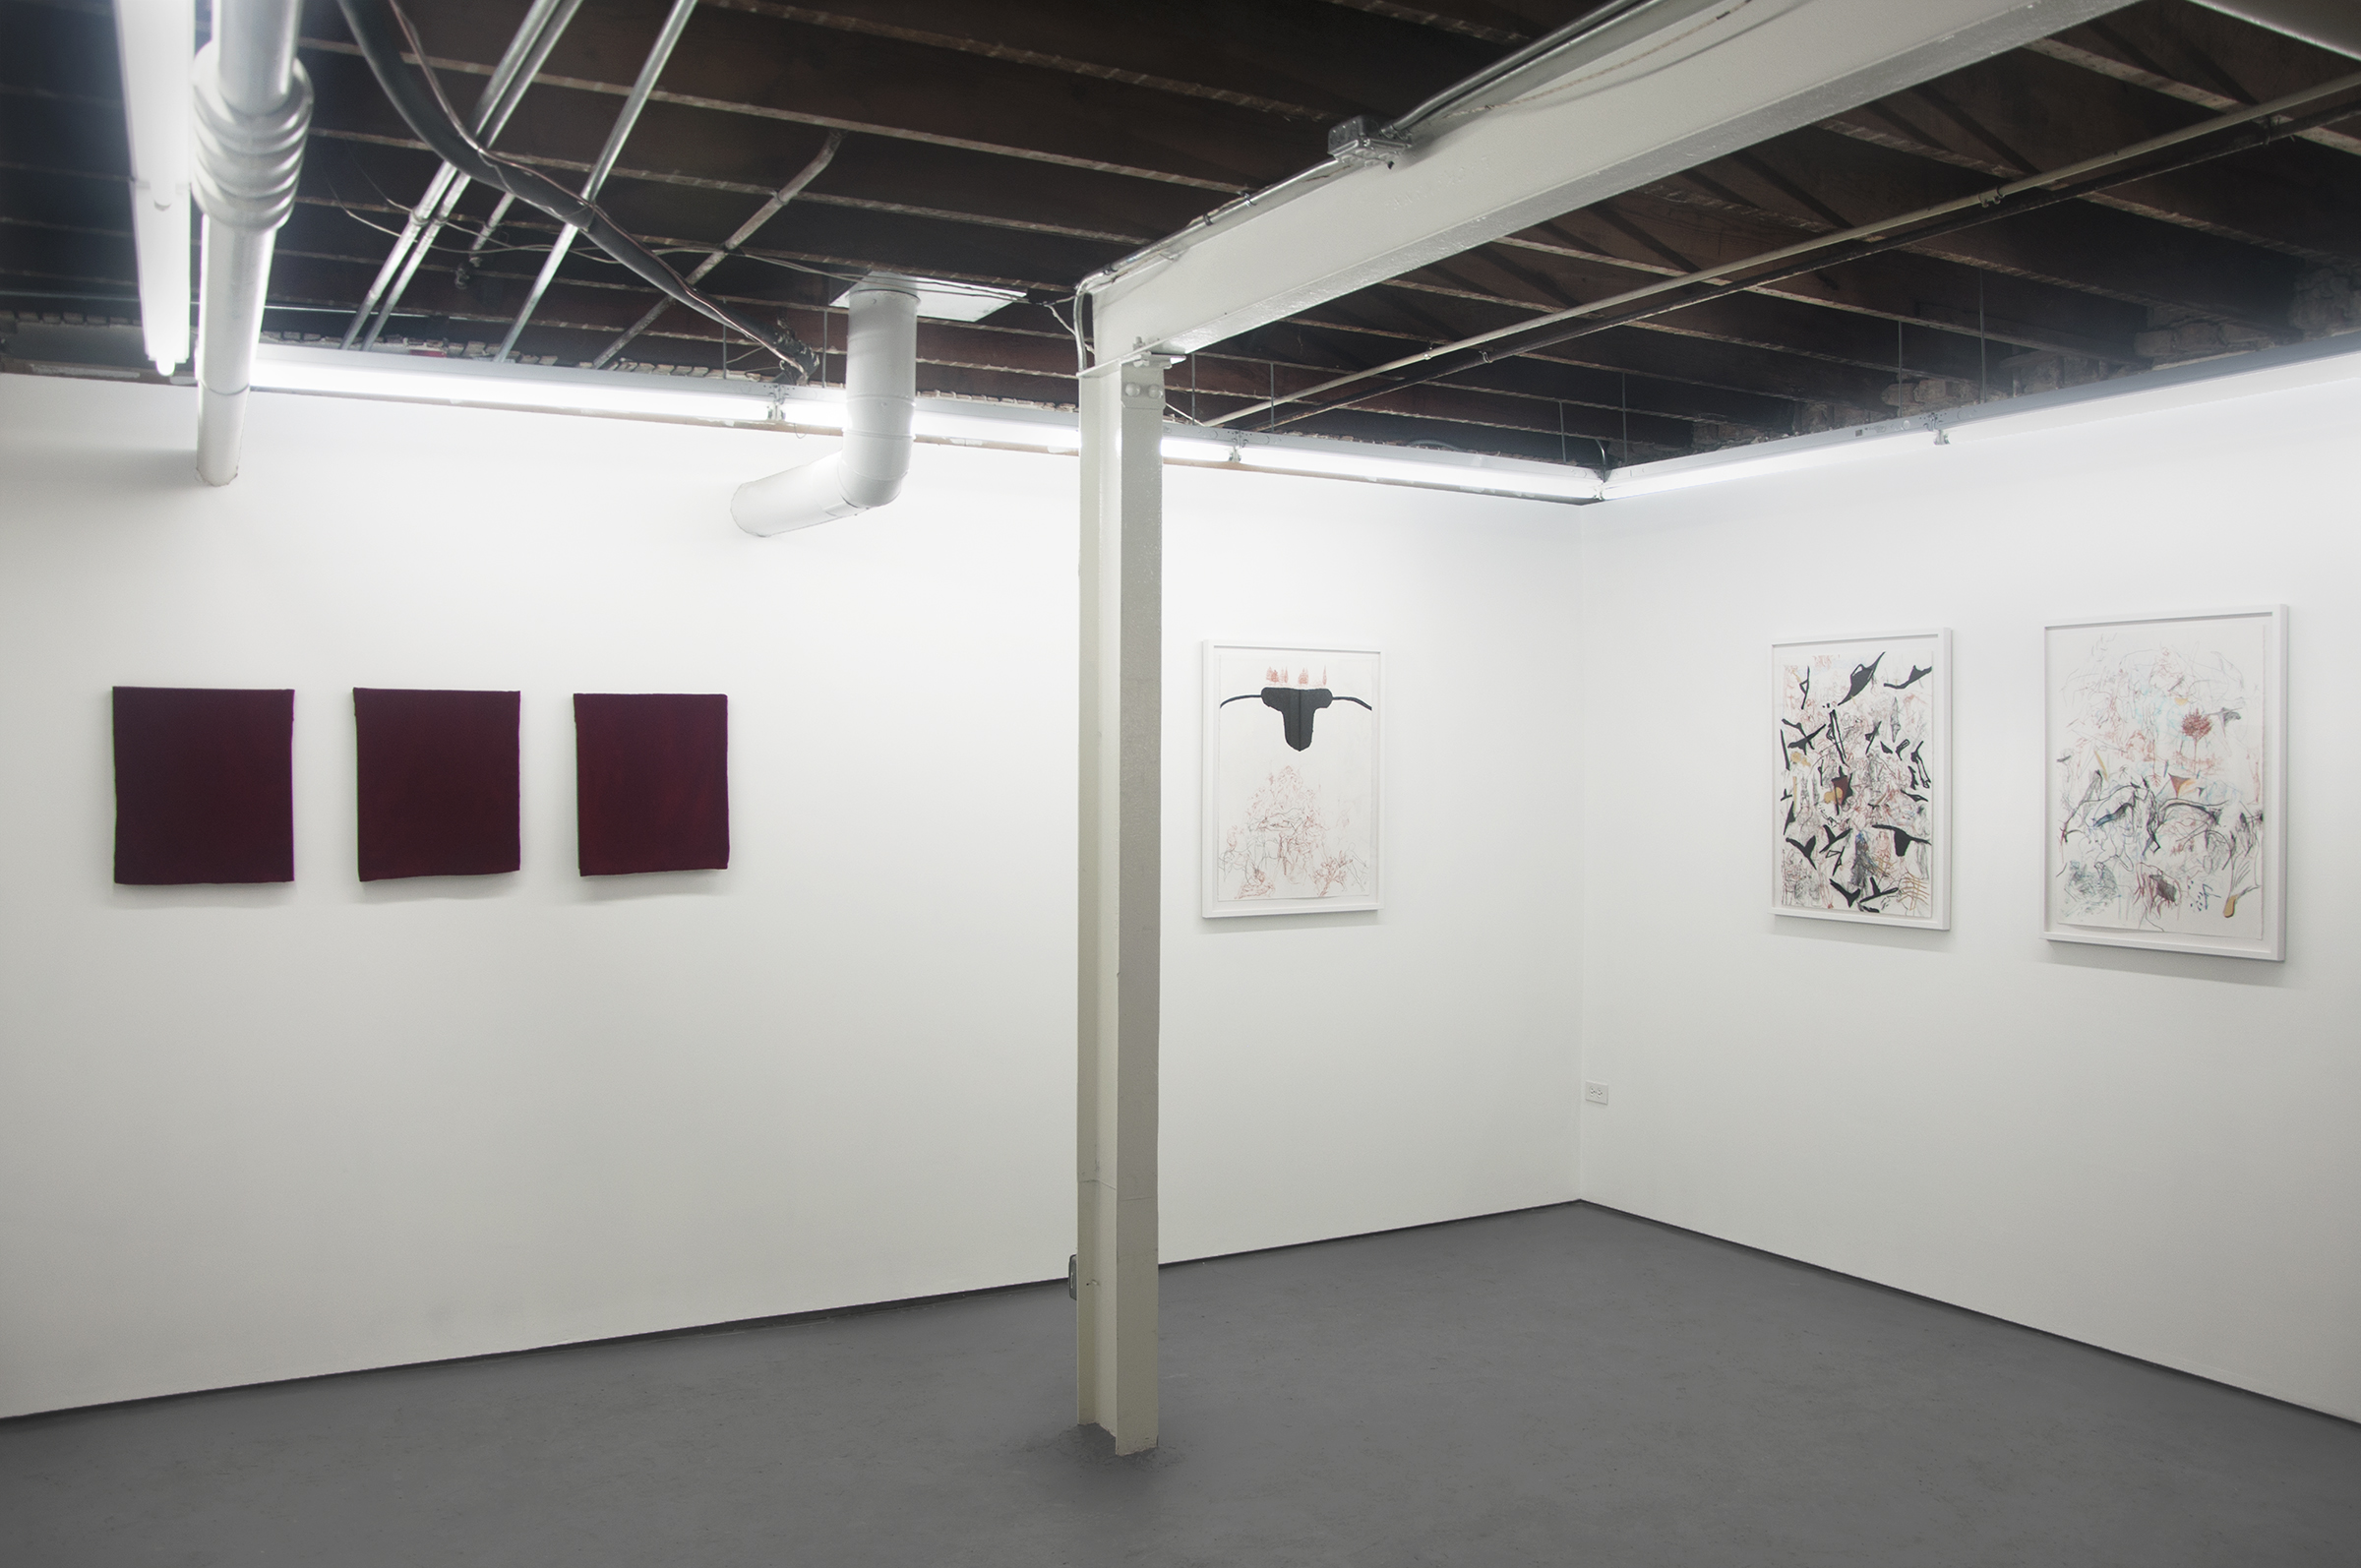 Frontward Tilt (from left to right), Jeremy Biles, “Ariadne's Thread”, 2015, digital print with graphite and wax crayon on newsprint with velvet veil; Jeremy Biles, “The Sensation of Time”, 2015, digital print with graphite, colored pencil, and collage on newsprint with velvet veil; Jeremy Biles, 2015, “Mirror of Tauromachy”, digital print with graphite, colored pencil, and semen on newsprint with velvet veil; Rebecca Walz + Ryan M. Pfeiffer, 2015, “The Annunciation”, Chalk Lead & Charcoal; Rebecca Walz + Ryan M. Pfeiffer, “The Labyrinth”, 2015, Graphite, Chalk Lead, Colored Pencil, Charcoal, Iron Oxide & Gold Leaf; Rebecca Walz + Ryan M. Pfeiffer, “The Adjustment”, 2015, Graphite, Chalk Lead, Water Color, Colored Pencil, Charcoal & Gold Leaf.